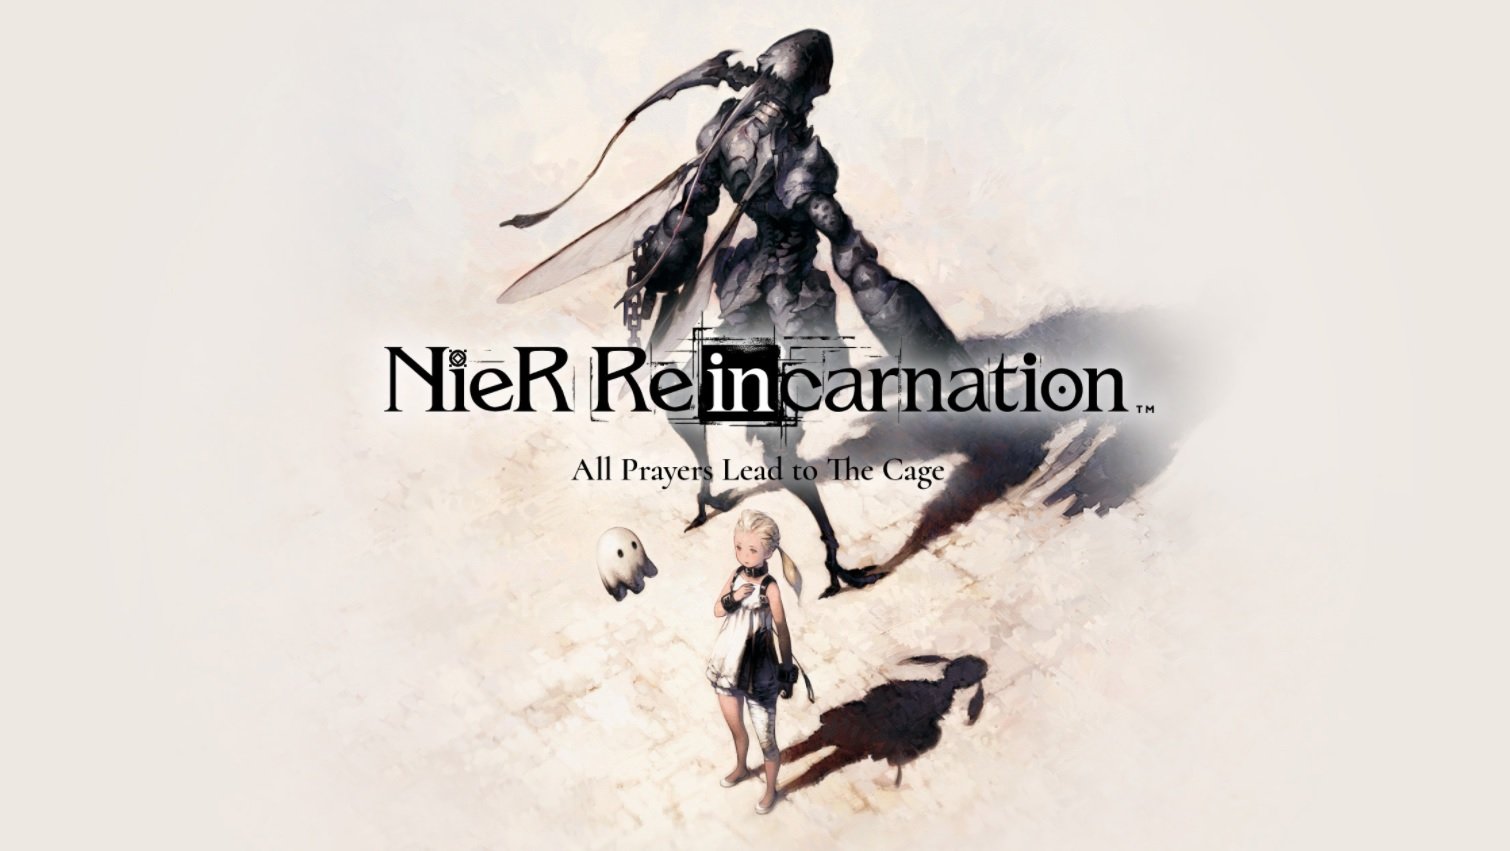 Nier Reincarnation for Android review: A pretty Nier story stuck